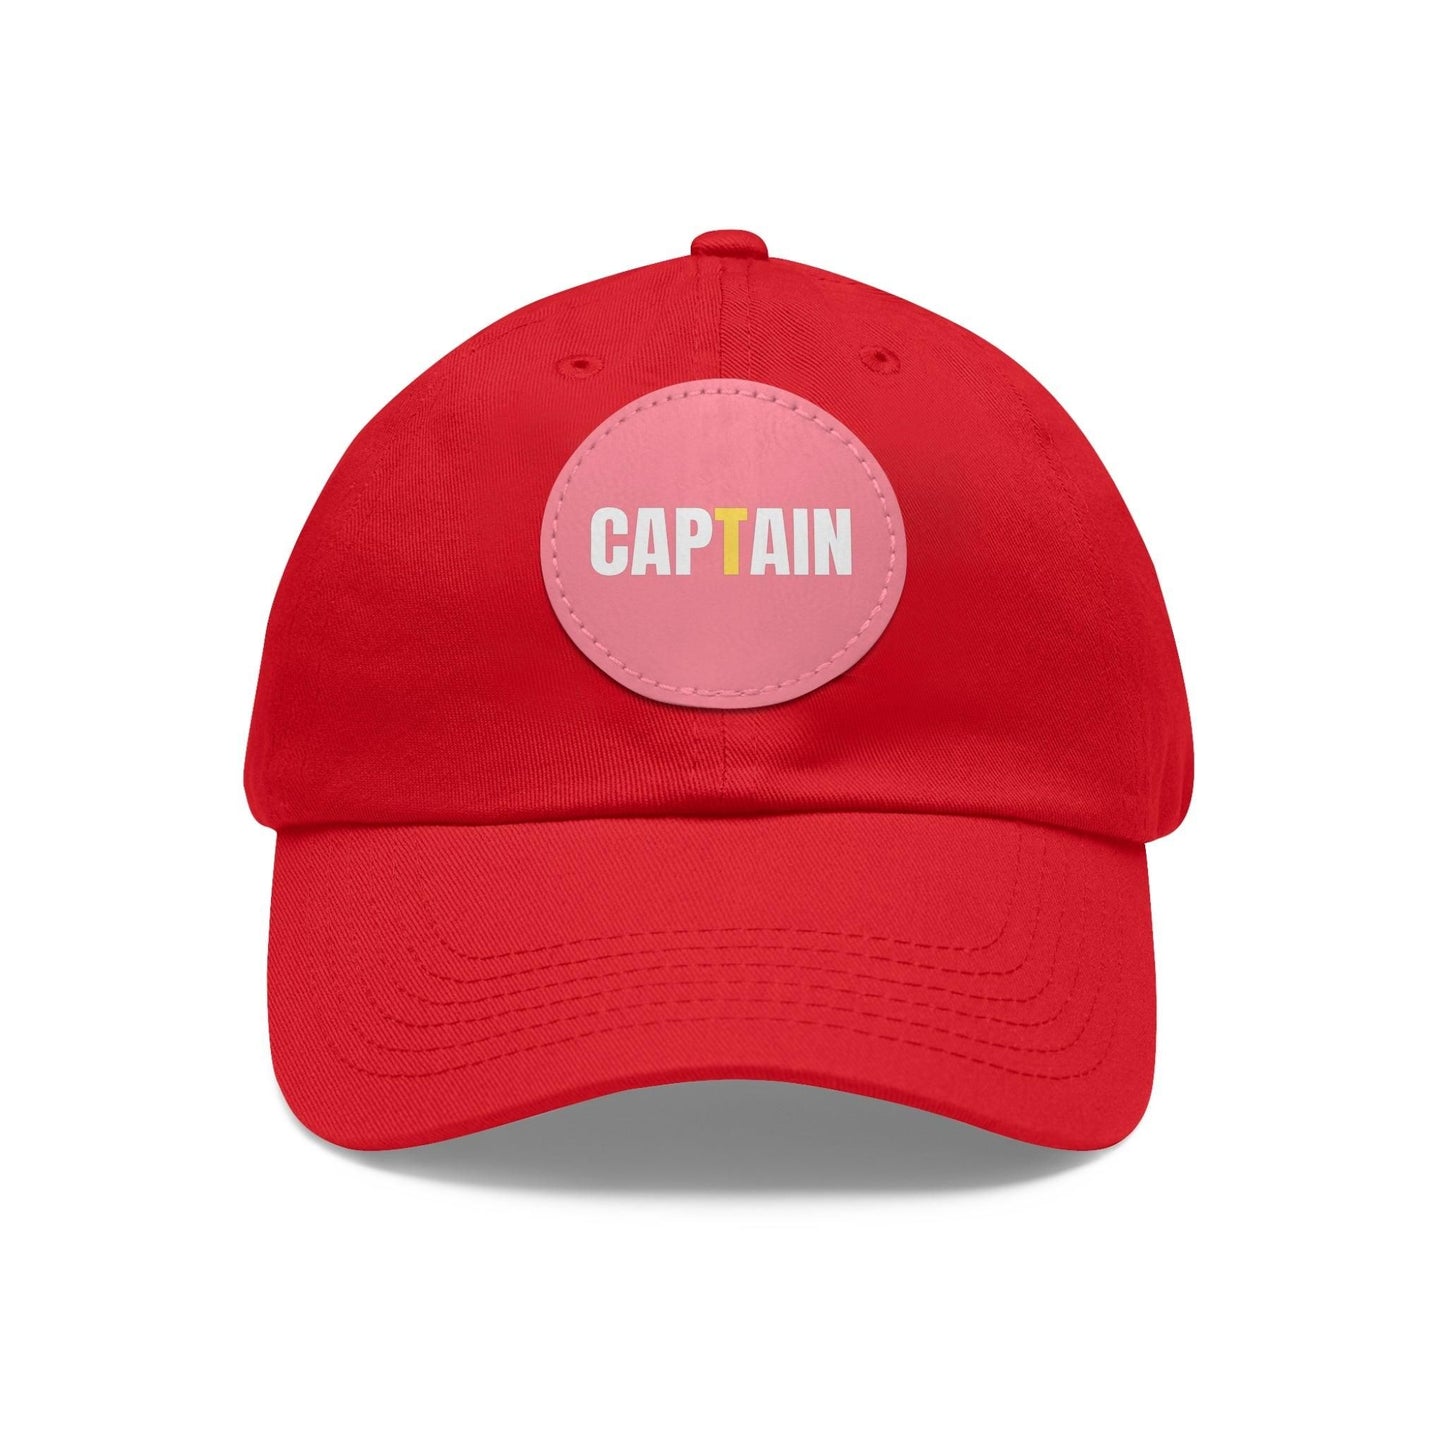 Captain Baseball Hat with Leather Patch Cap Red / Pink patch Circle One size